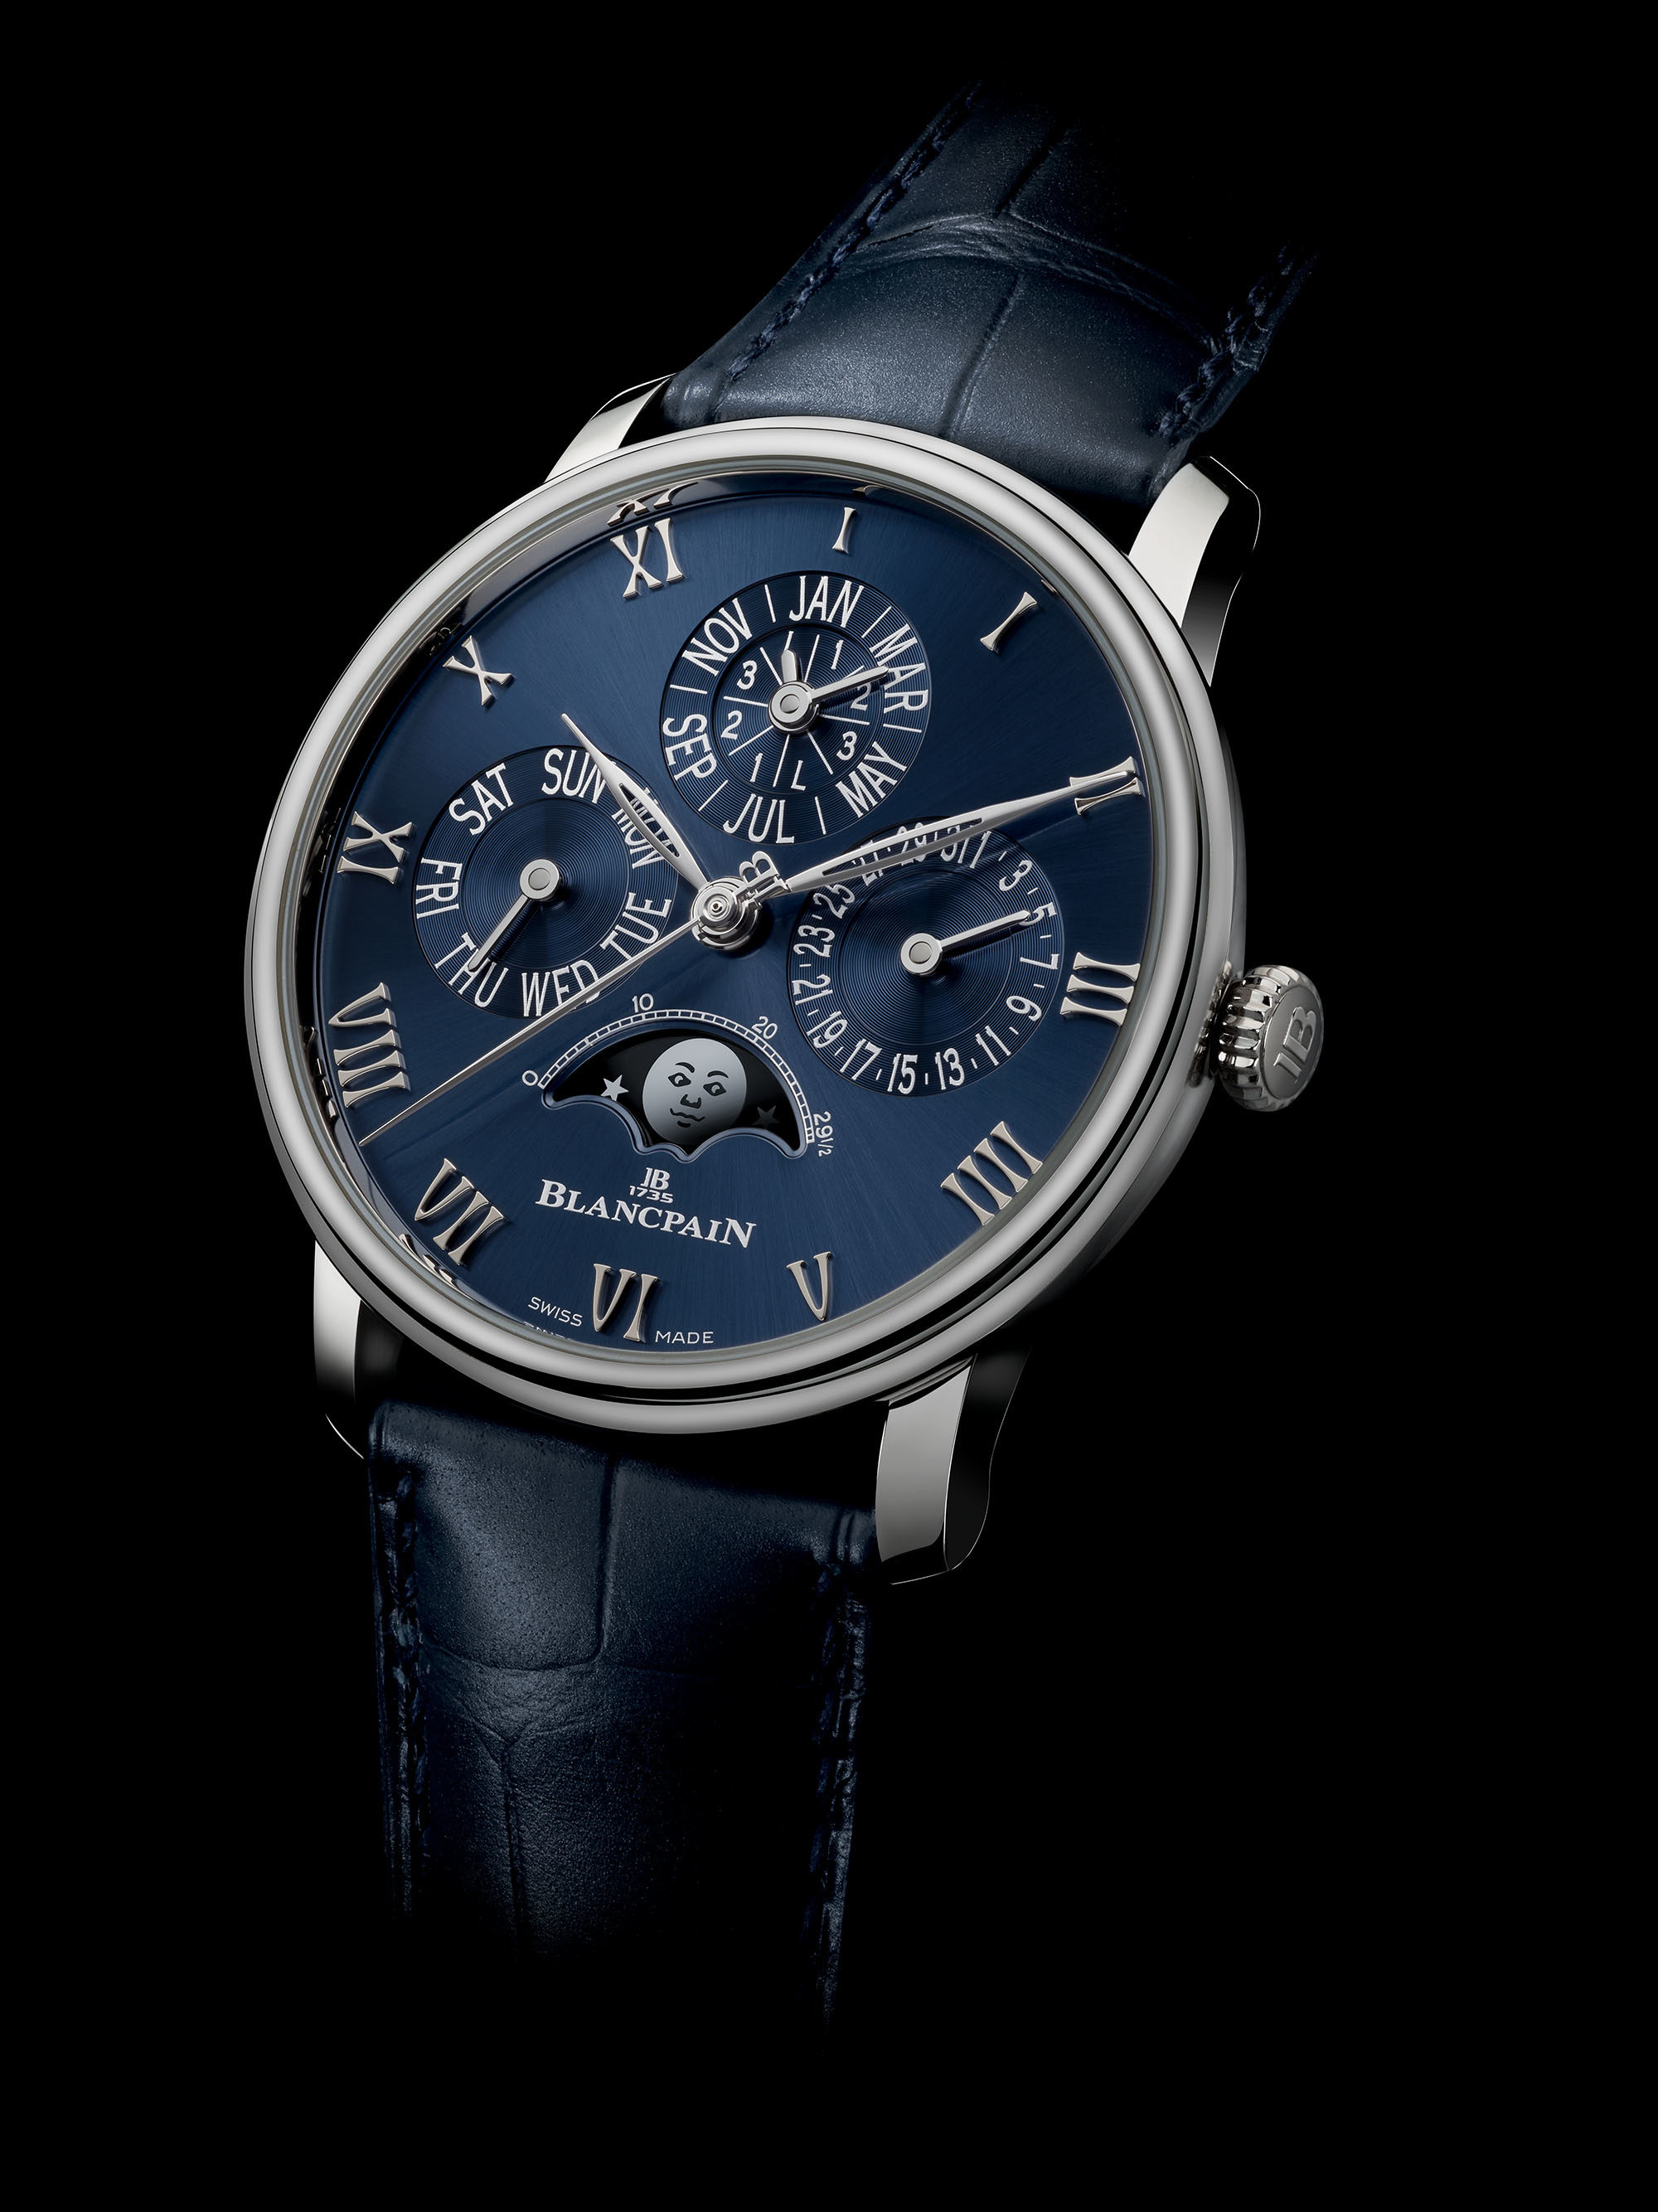 Blancpain Revisits Its Perpetual Calendar Exclusively For Its Boutiques ...